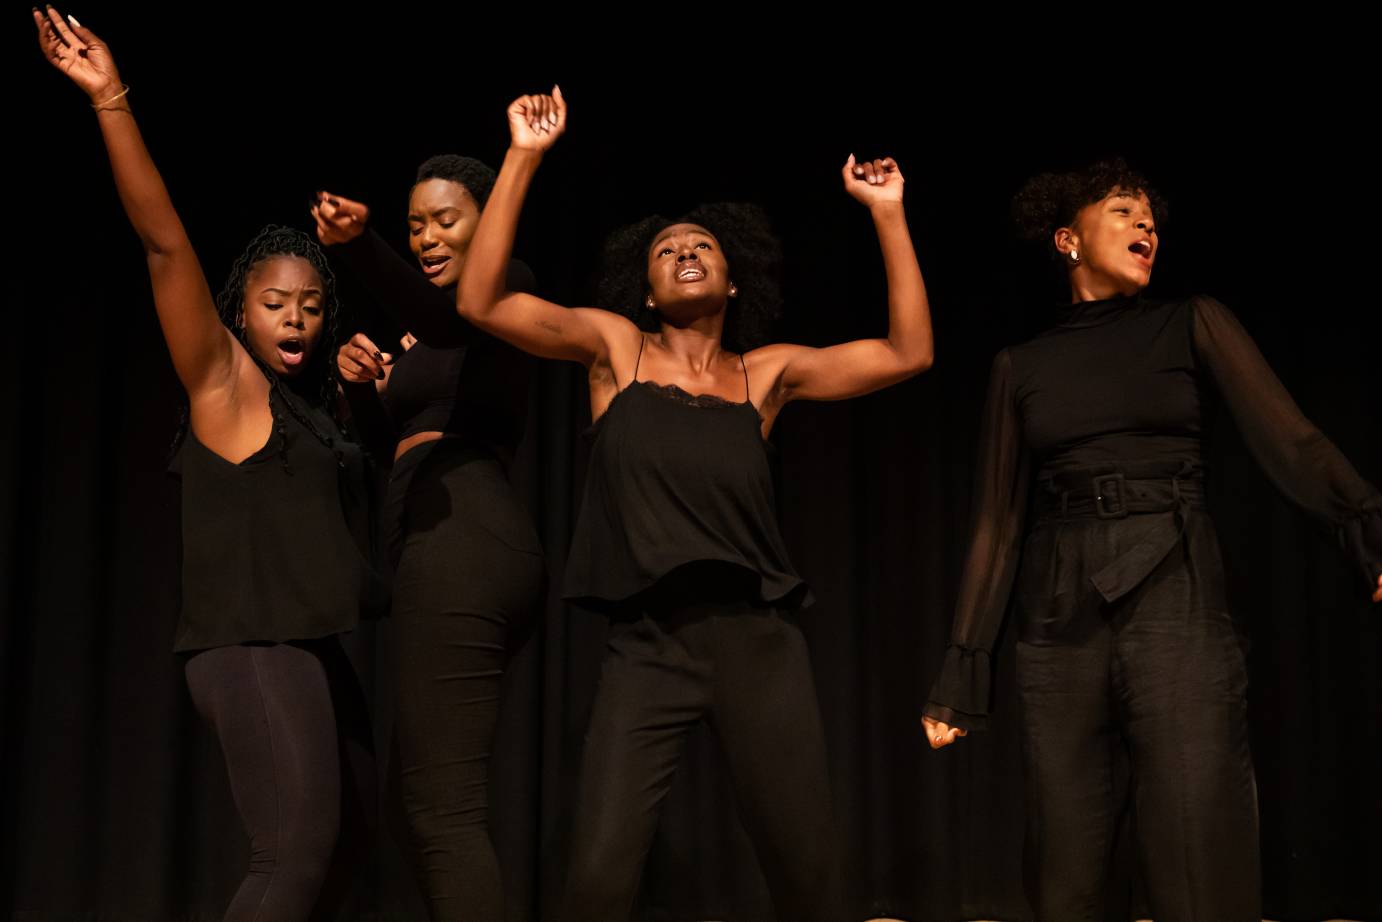 Four Black women dressed in black costumes - over the shoulder, sleeveless, to the chin. Center woman both arms upraised with bent elbows facing the audience, woman on left right arm extended on diagonal, woman on right with head turned over left shoulder, fourth woman head tucked 